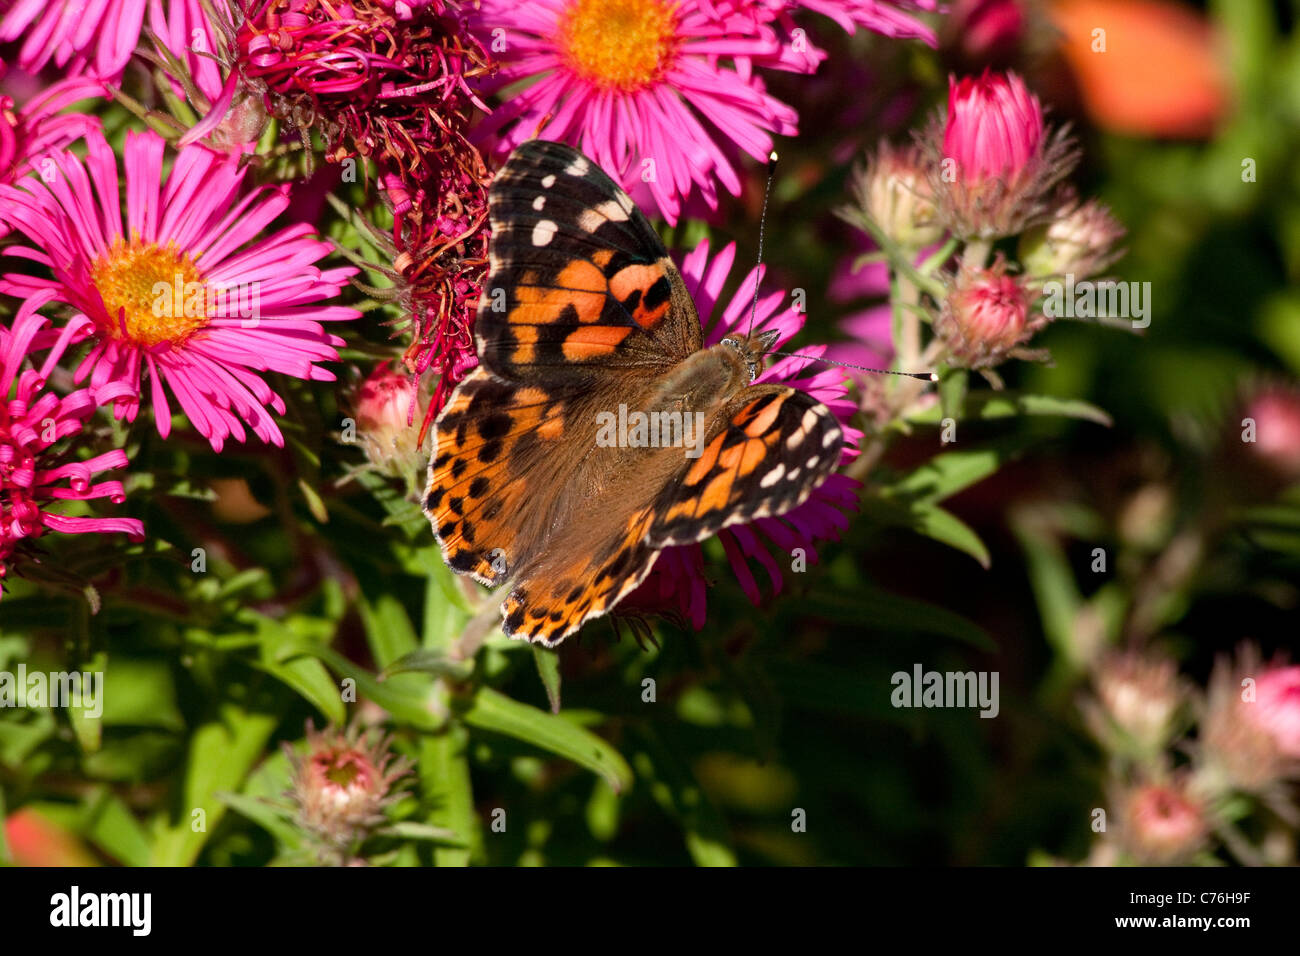 Butterfly in the gardens of Chirk Castle, Wales Stock Photo